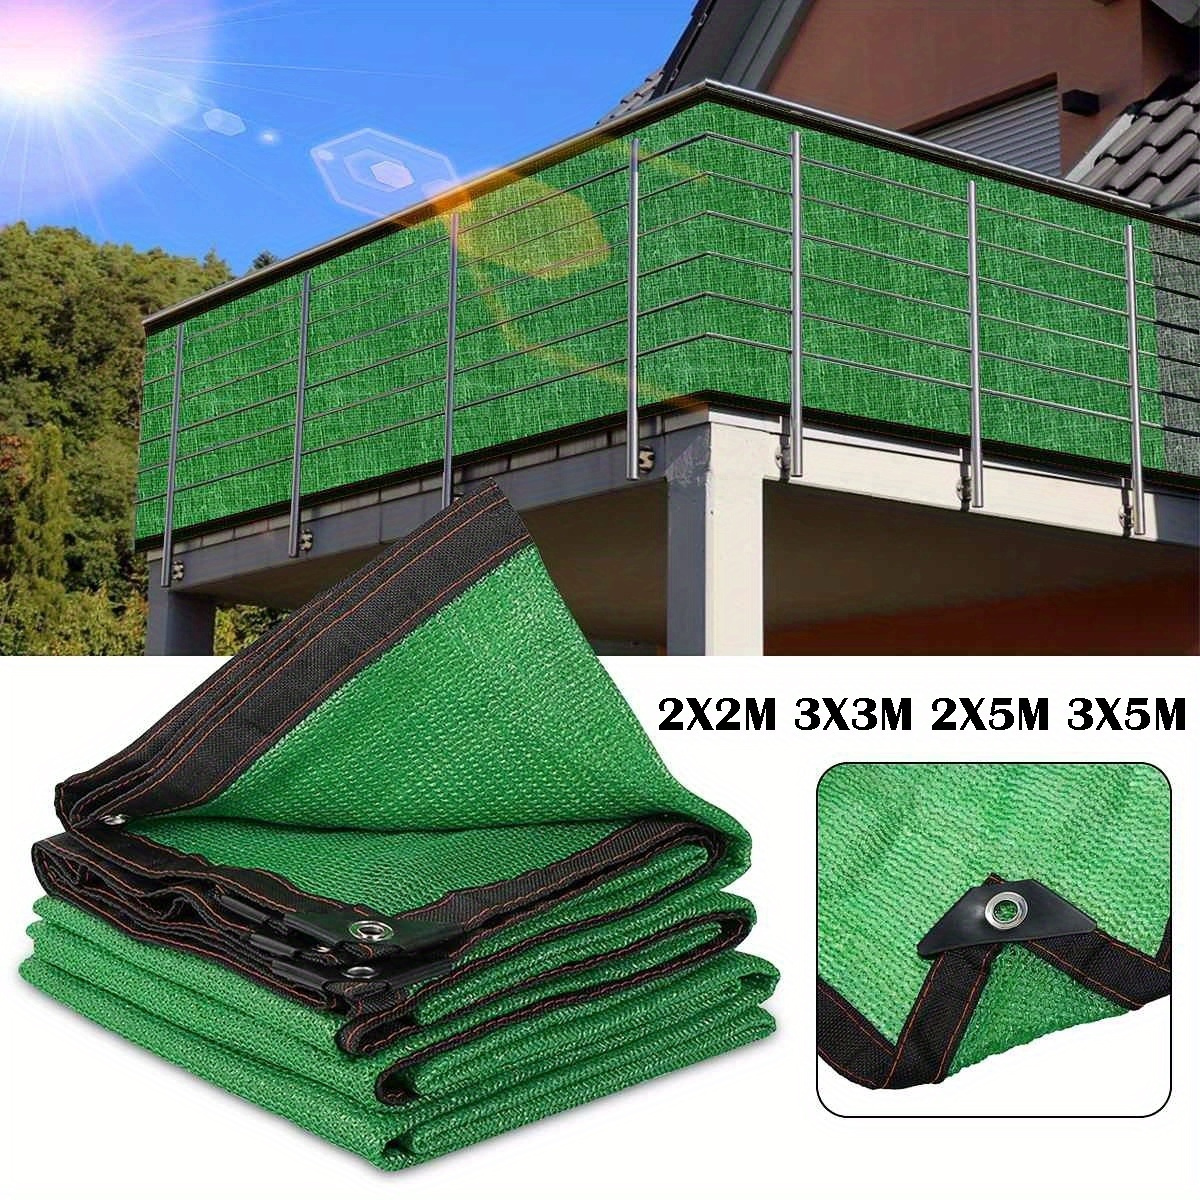 

Green Hdpe Privacy Screen - 90% Shade Rate, Anti-uv Garden Netting For Windbreak & Fencing Privacy Screens Outdoor Panels